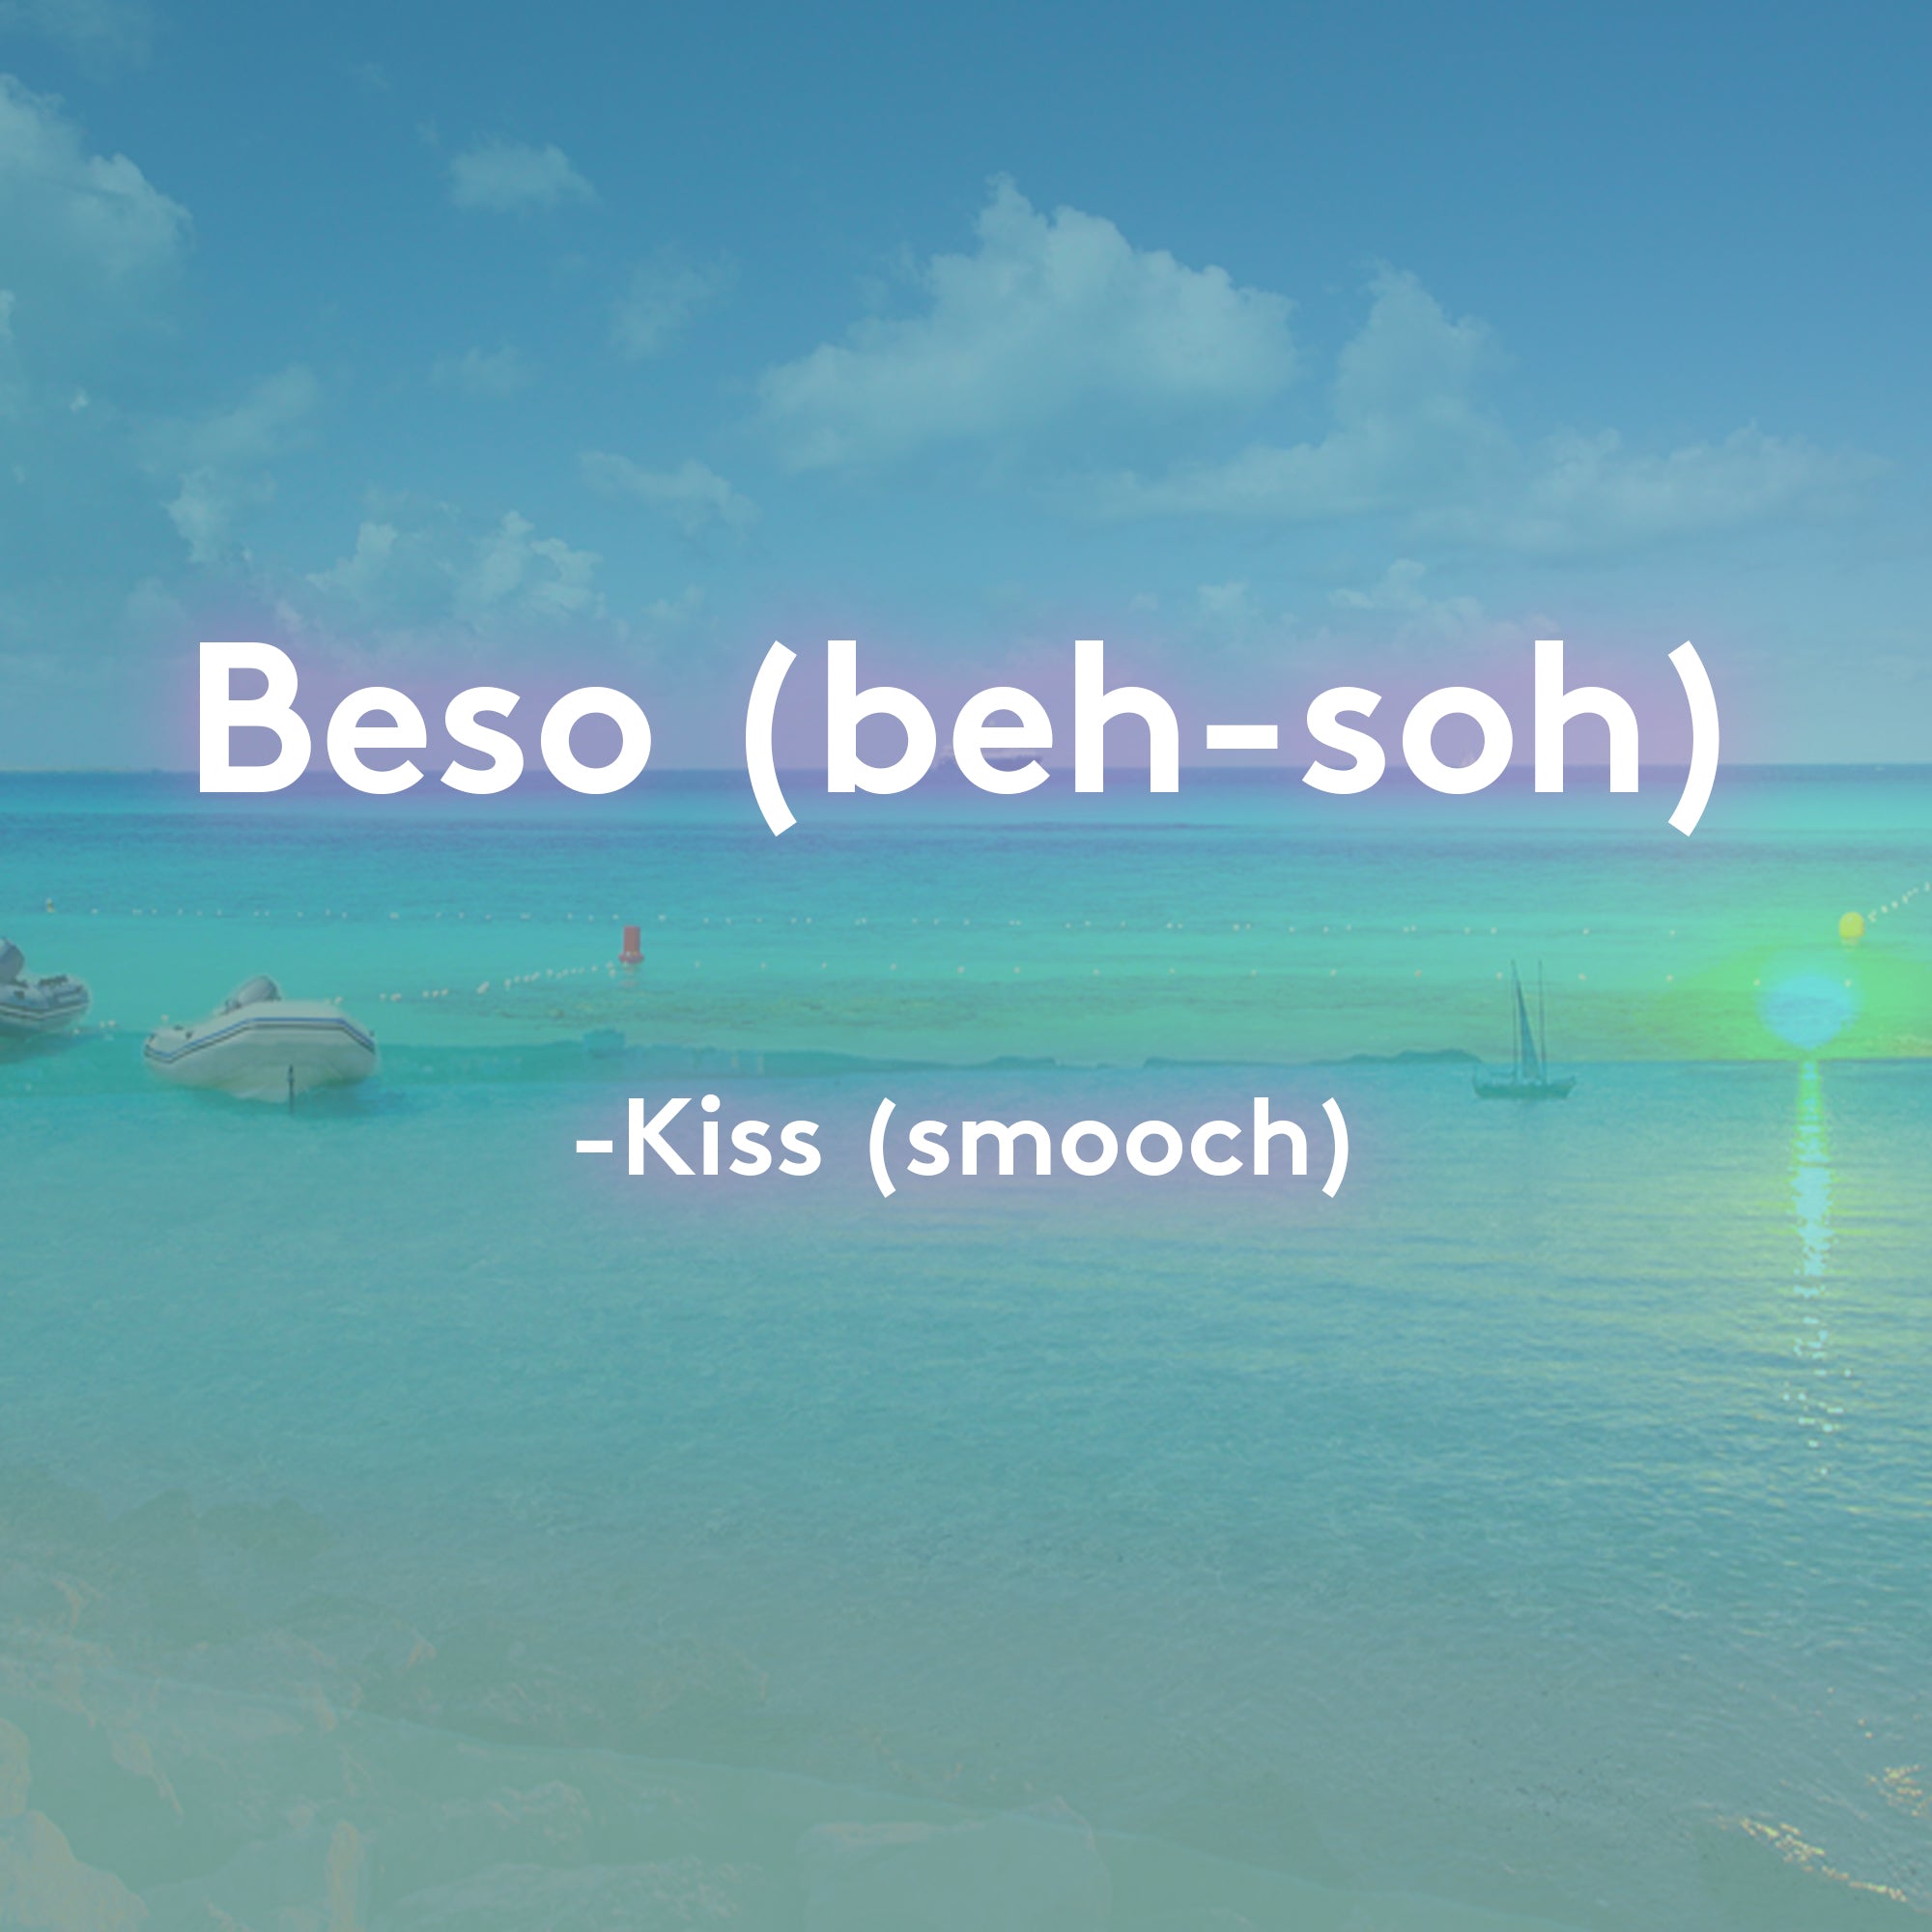 sea with text overlay of Spanish translation for kiss